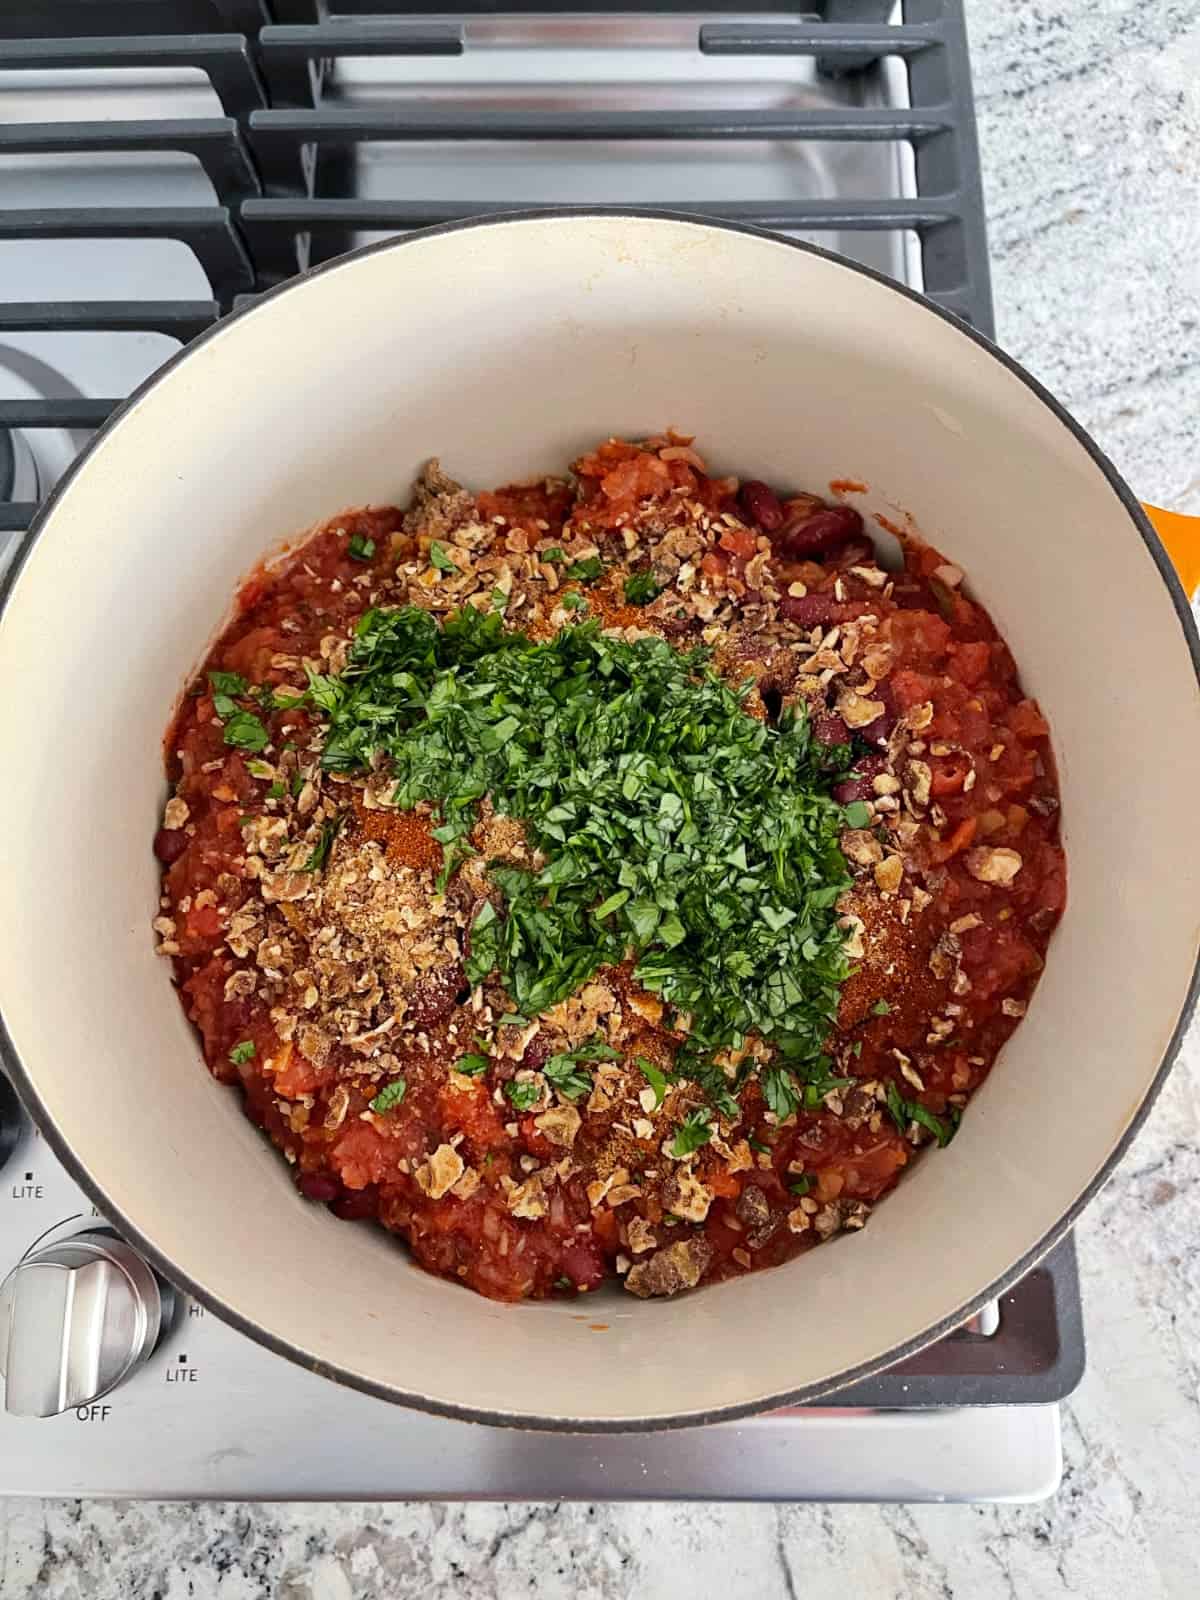 Uncooked meatless quorn chili in large sauce pan on stove top.